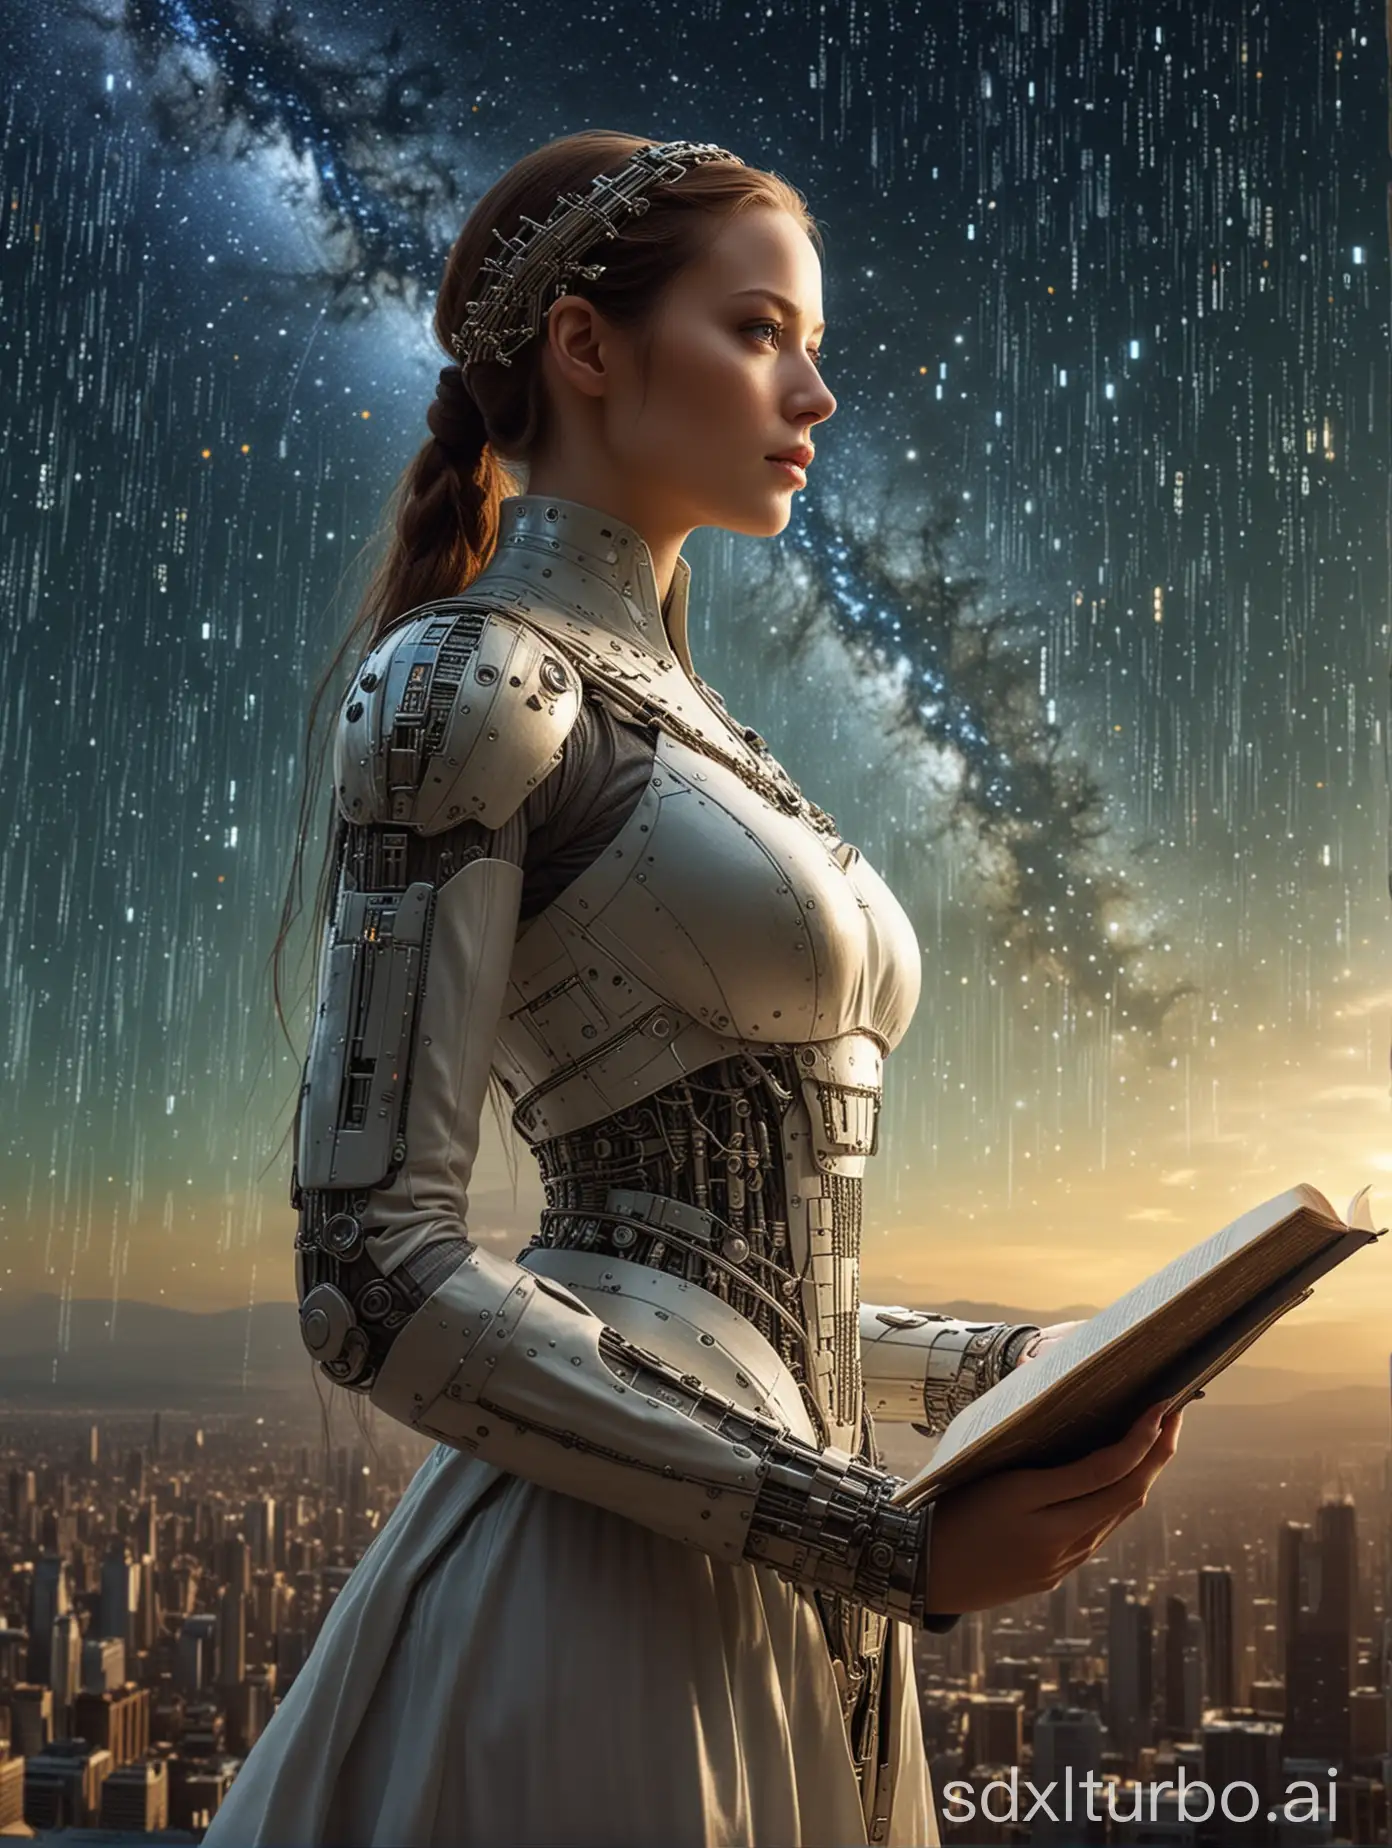 Futuristic-Android-Woman-Gazing-at-Starry-Binary-Sky-with-Ancient-Book